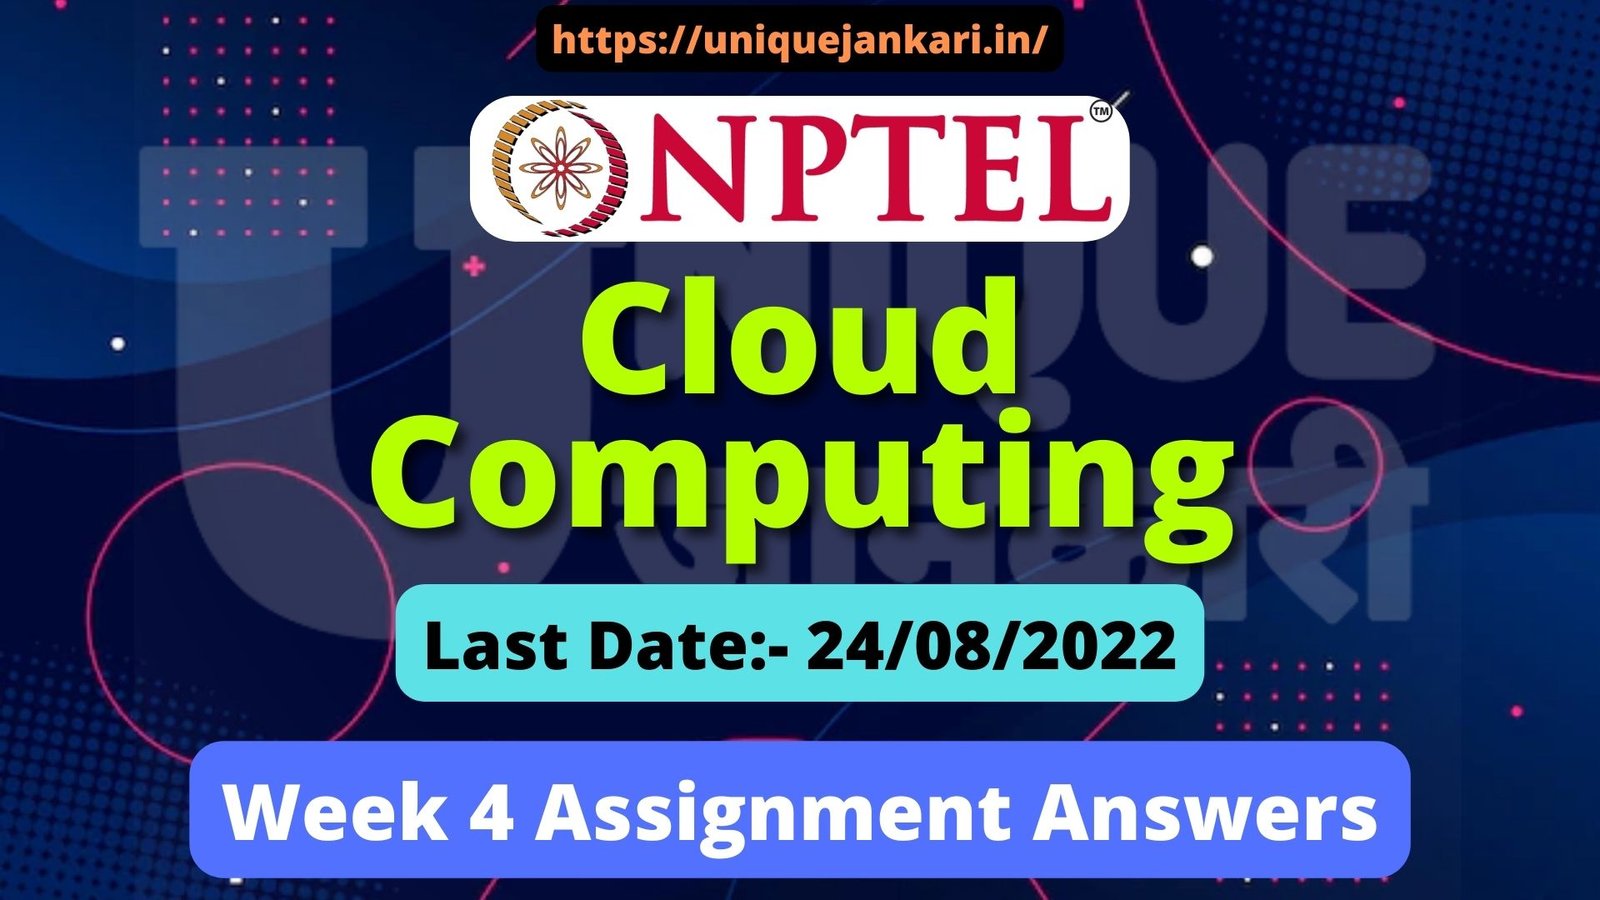 nptel cloud computing week 4 assignment answers